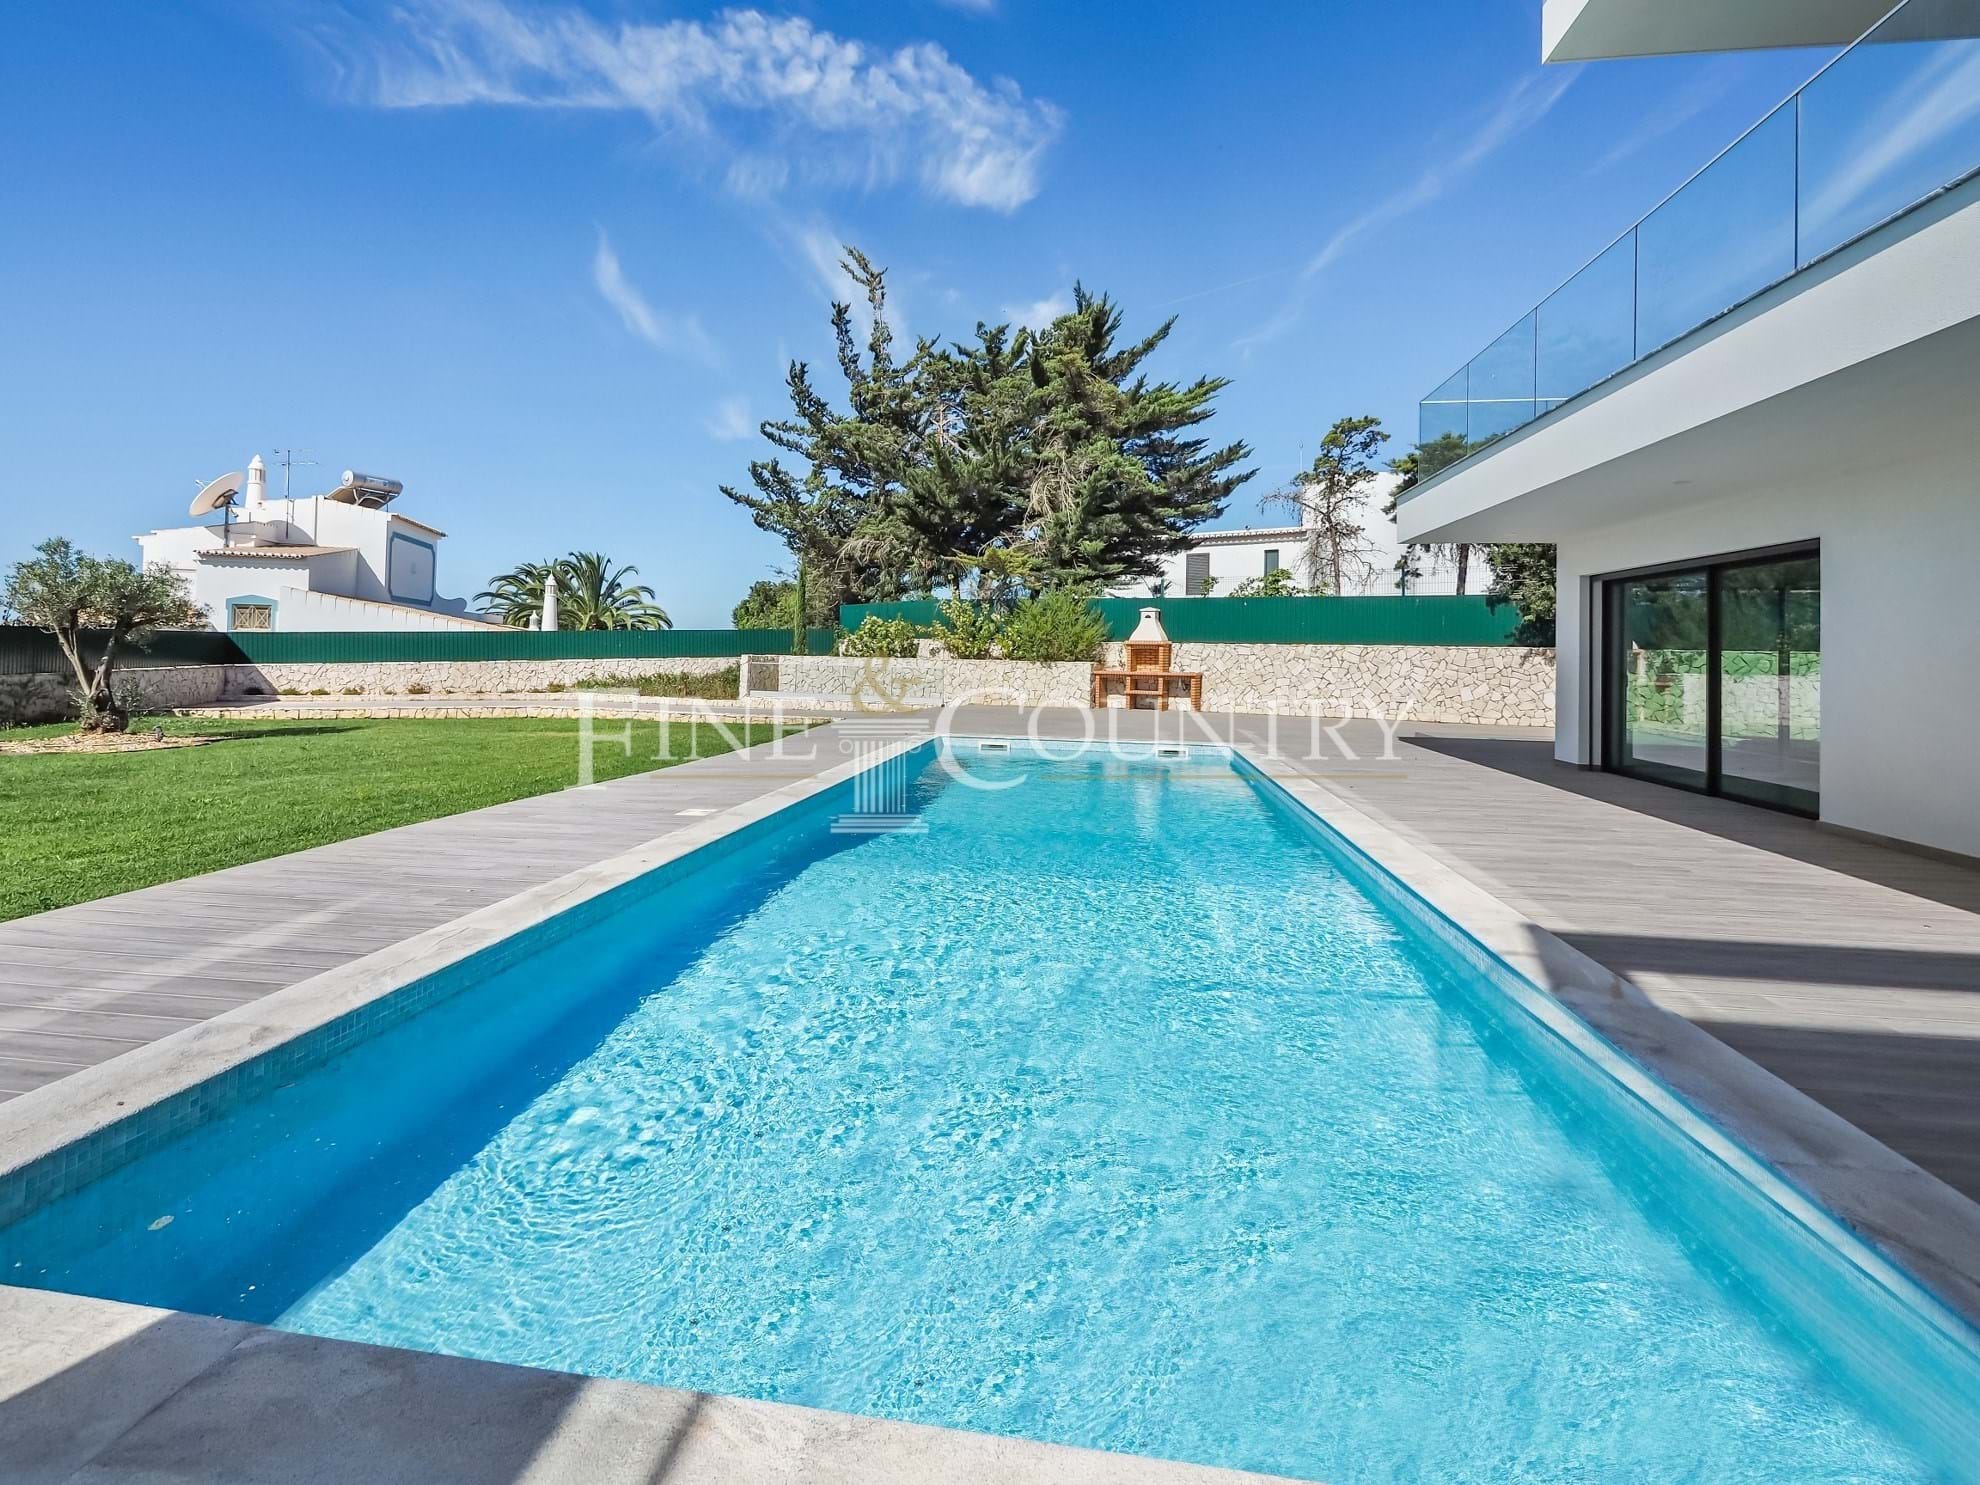 Photo of Ferragudo - Brand new 4-bedroom modern villa with pool, large garage and sea views